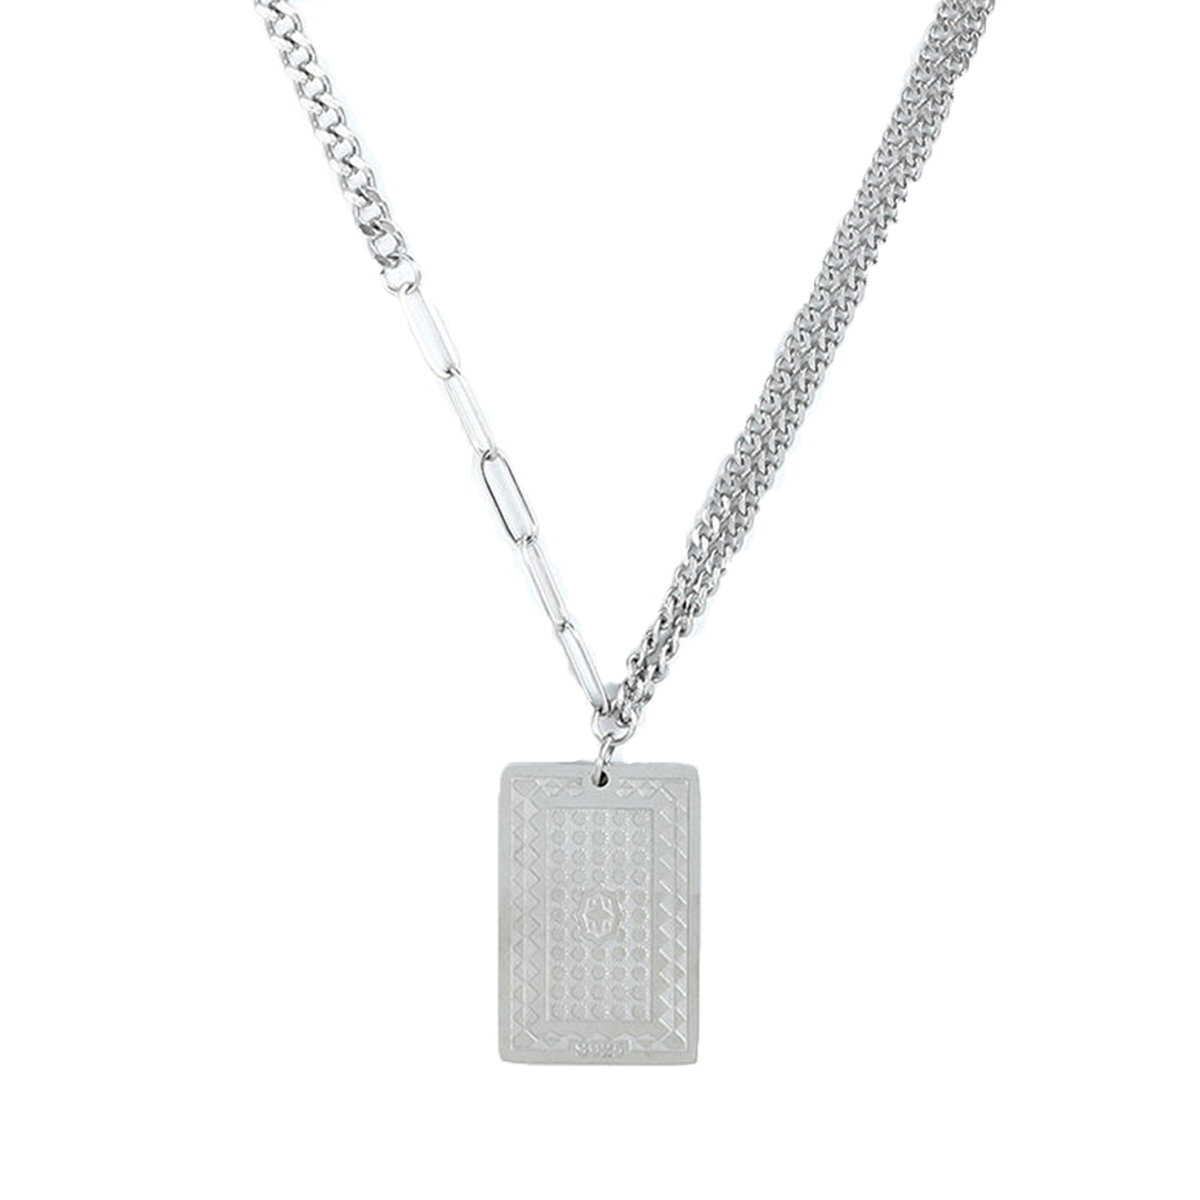 CHURINGASXL-0035 stainless steel playing card necklace